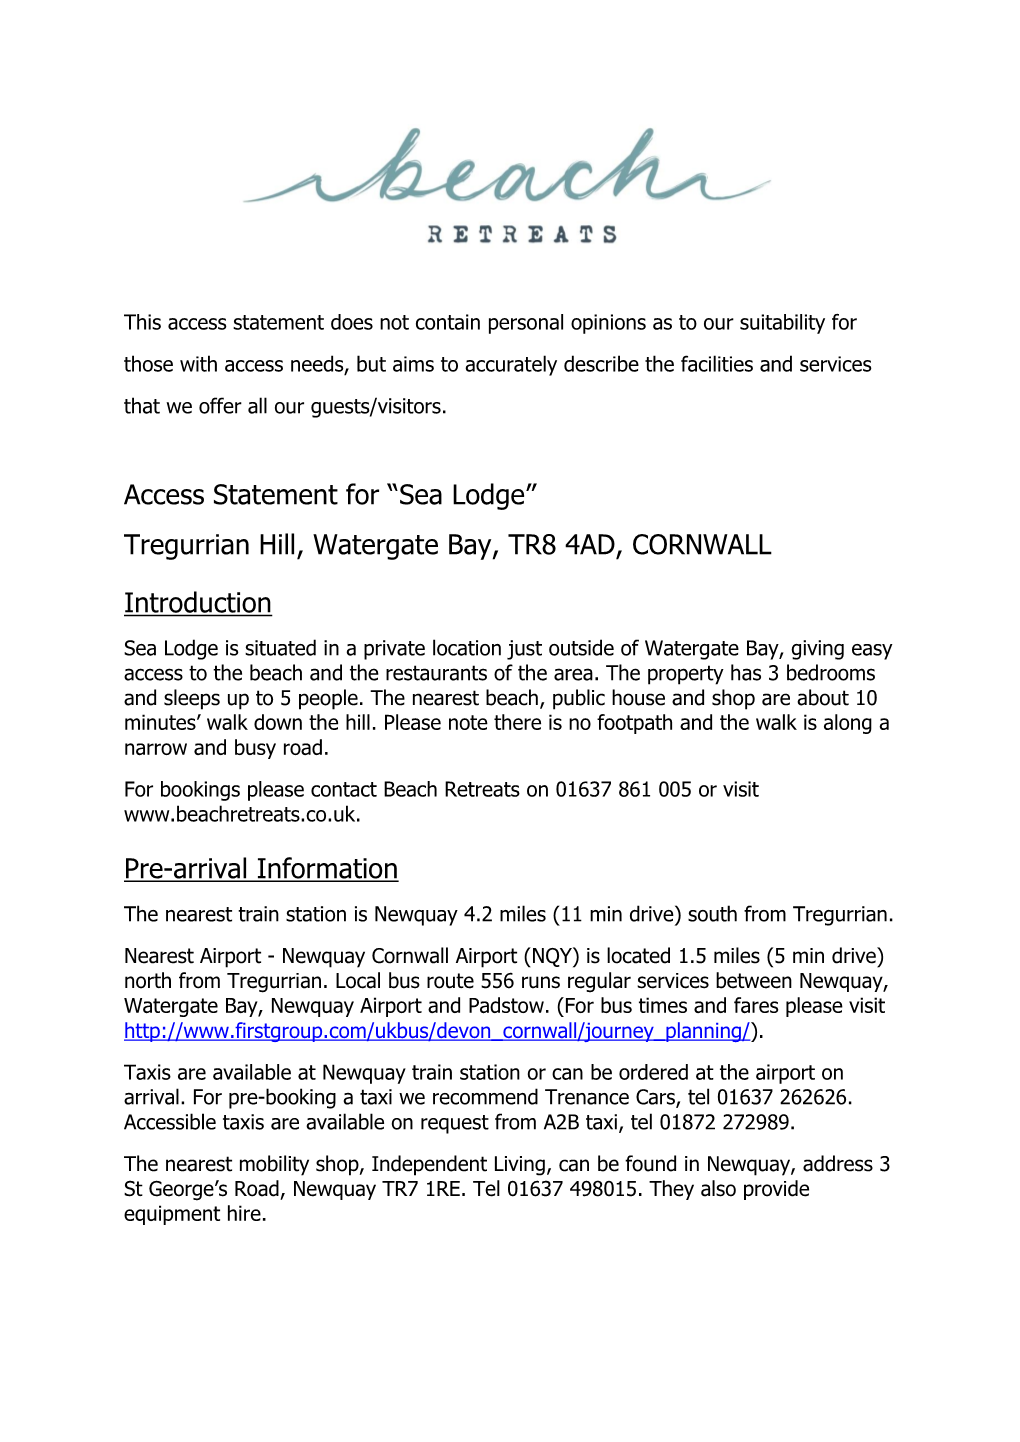 Access Statement for “Sea Lodge” Tregurrian Hill, Watergate Bay, TR8 4AD, CORNWALL